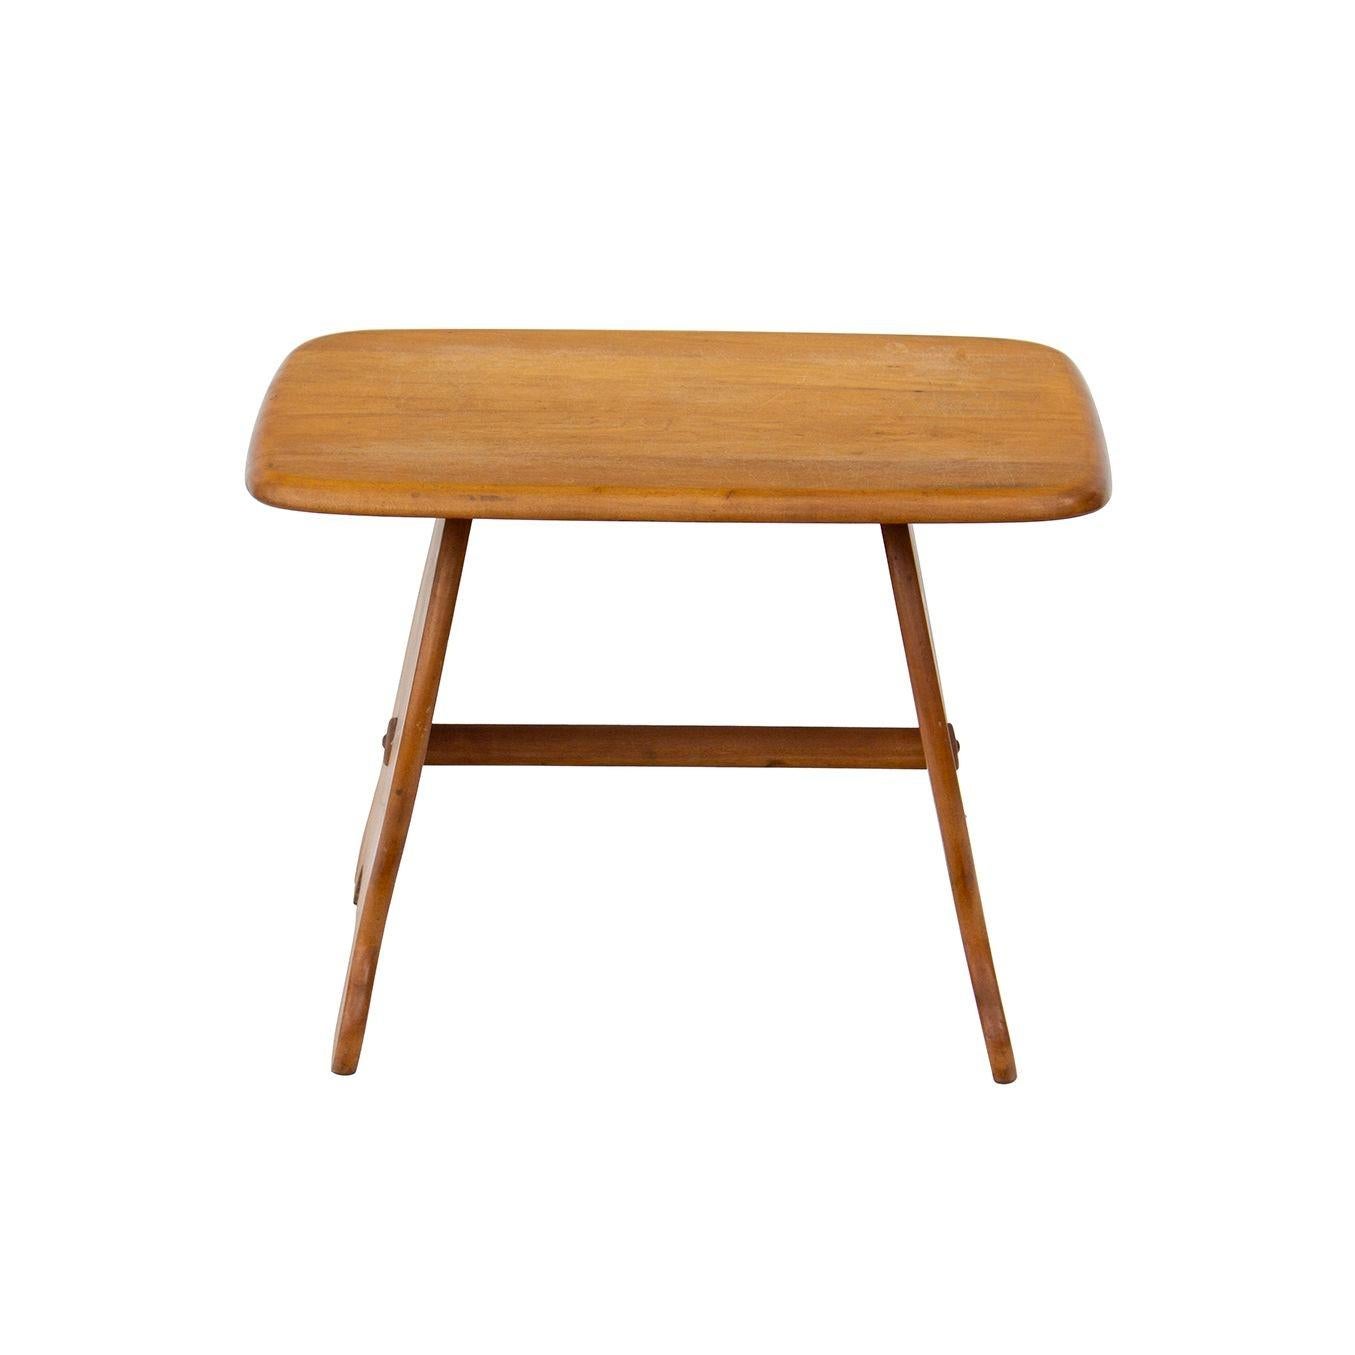 Whimsical Solid Maple Bench or Stool In Fair Condition For Sale In Grand Rapids, MI